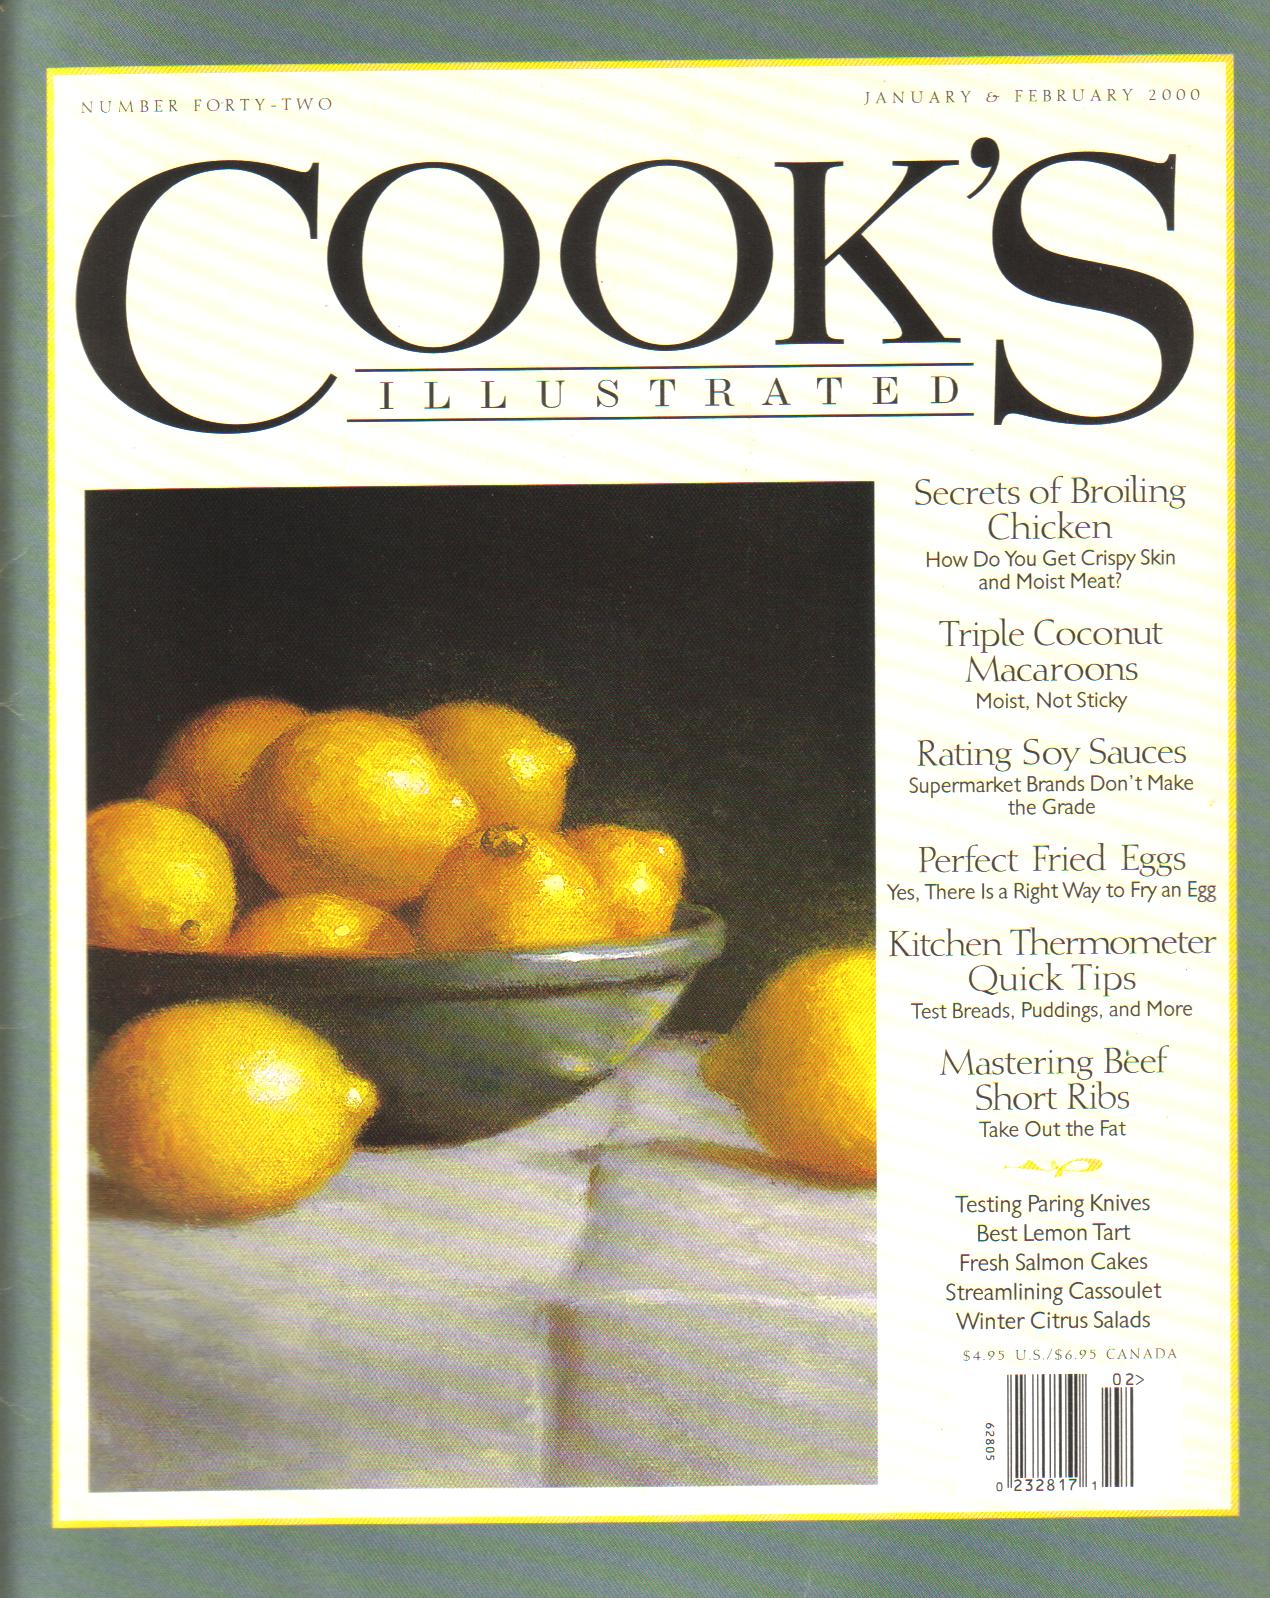 Cook's Illustrated Tests Oven Thermometers - Baking Bites